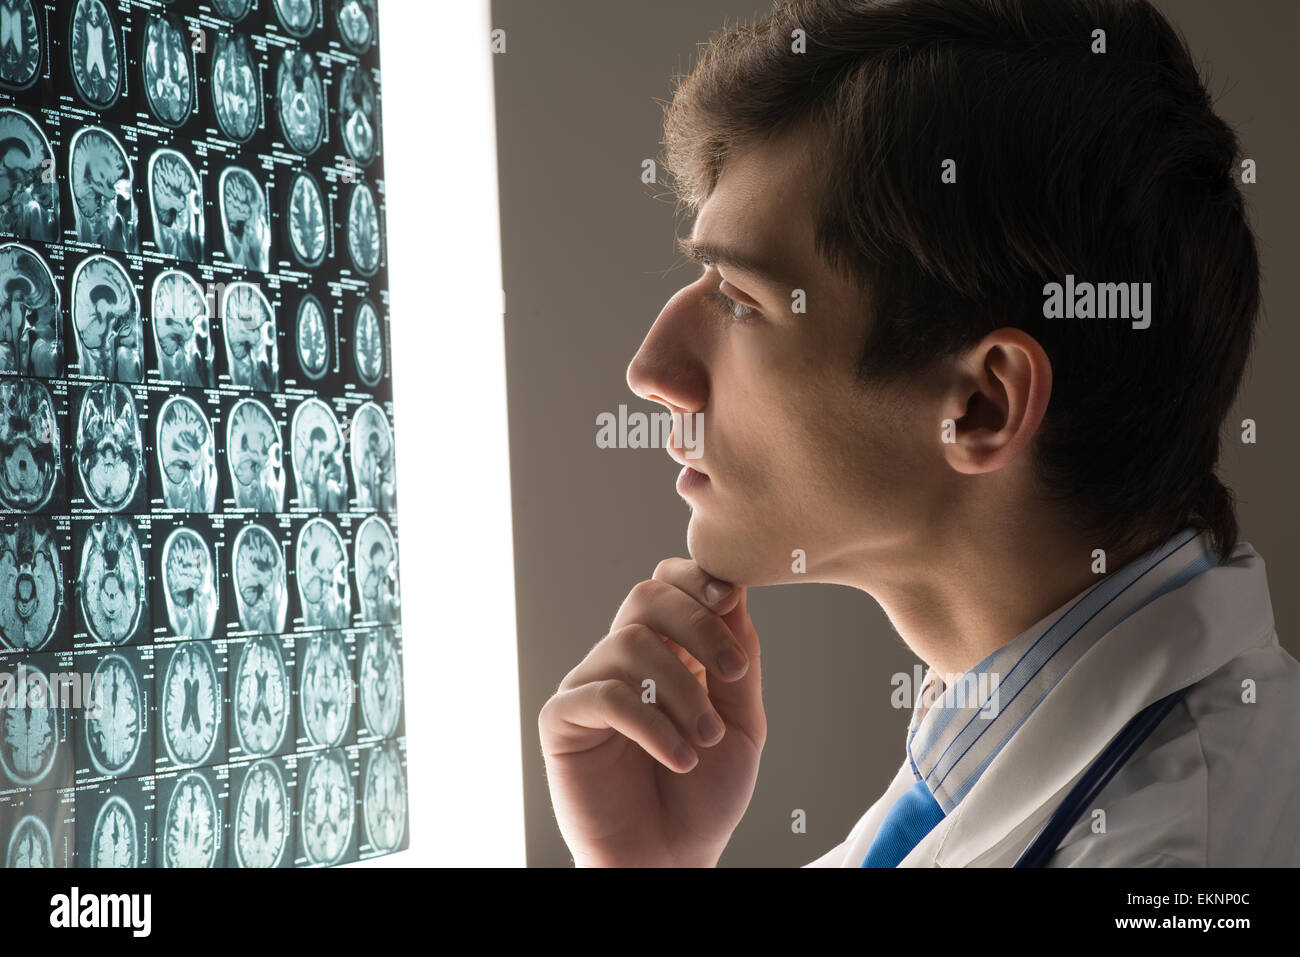 male doctor looking at the x-ray image Stock Photo